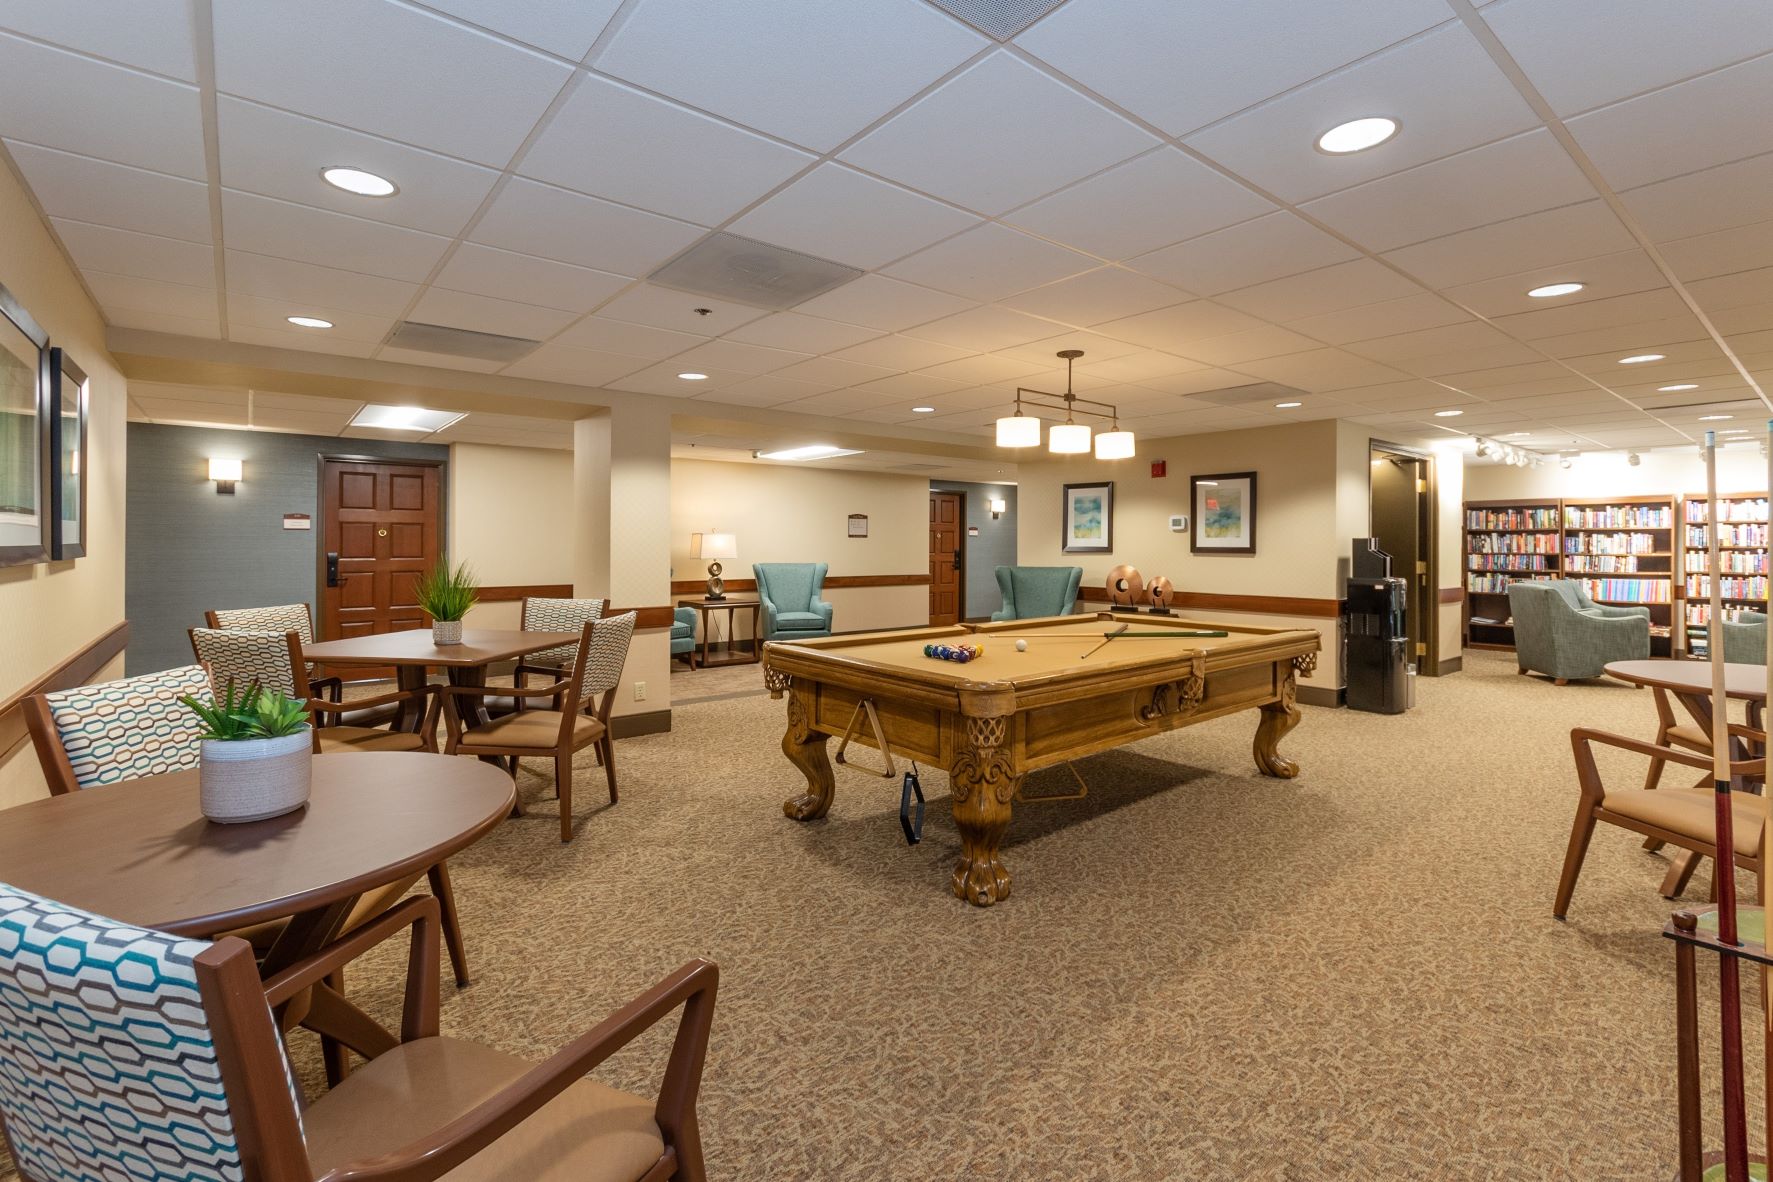 The Montebello on Academy boasts a spacious common area for our seniors!